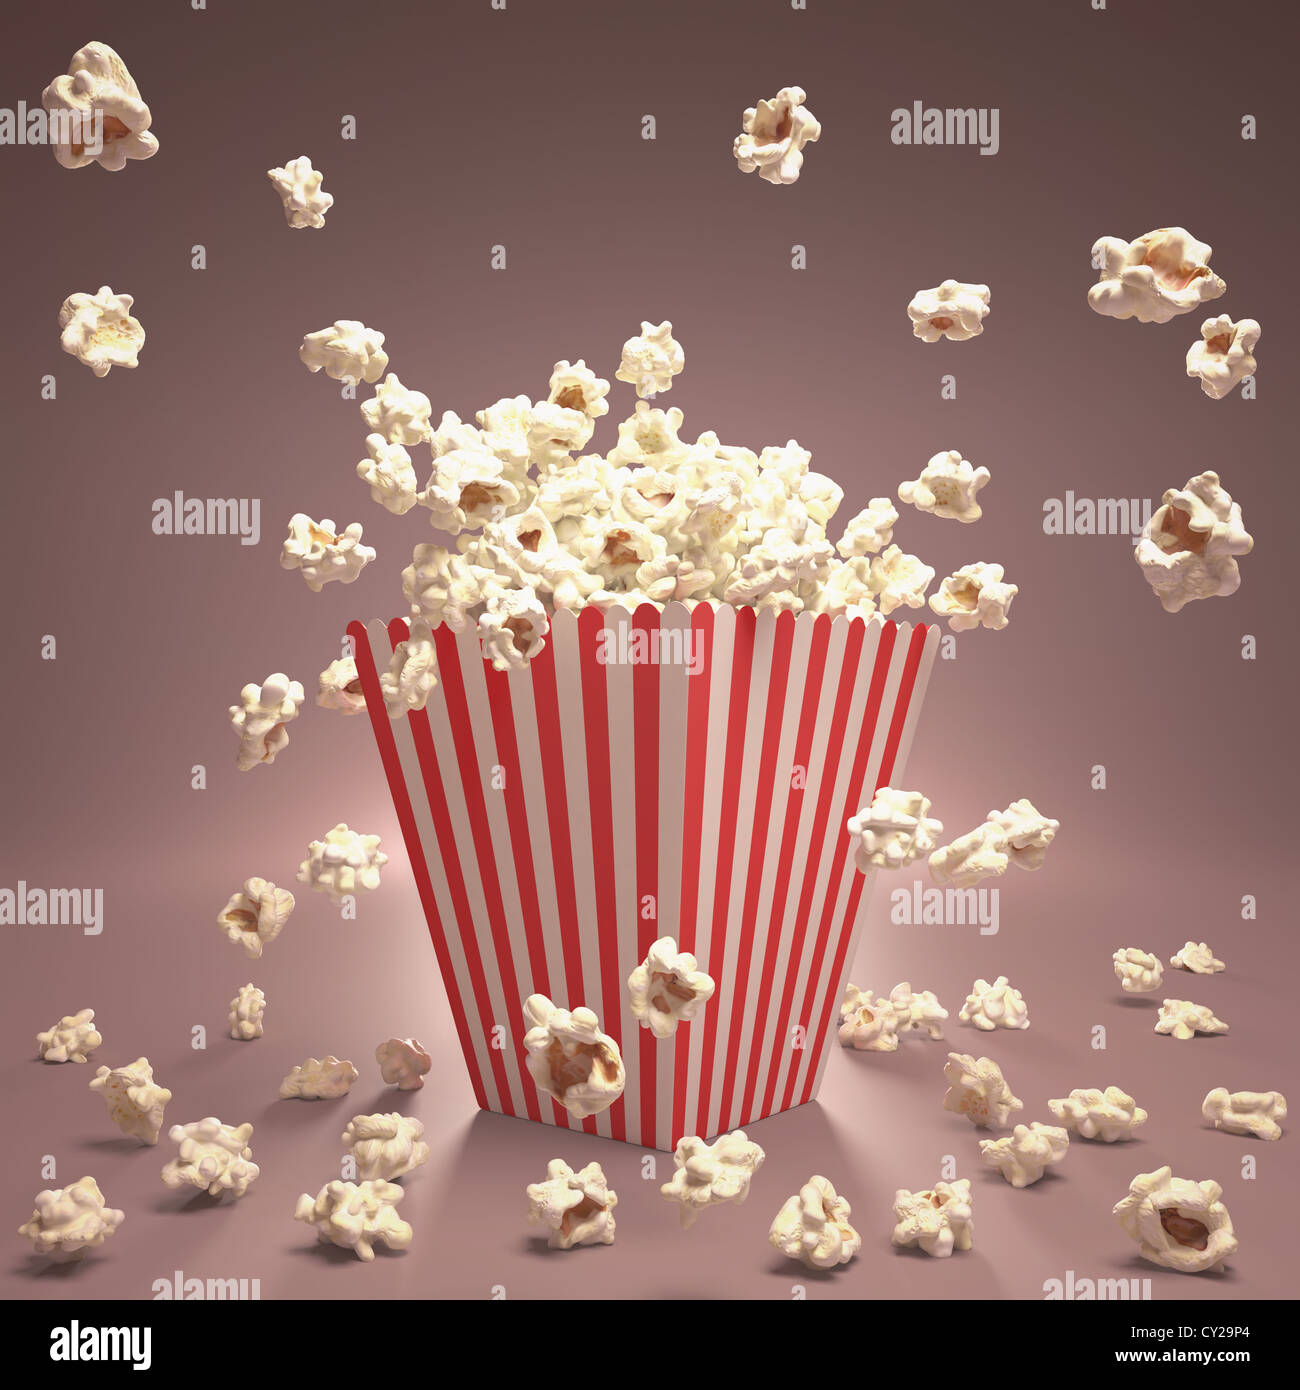 Popcorn exploding inside the packaging striped. Stock Photo